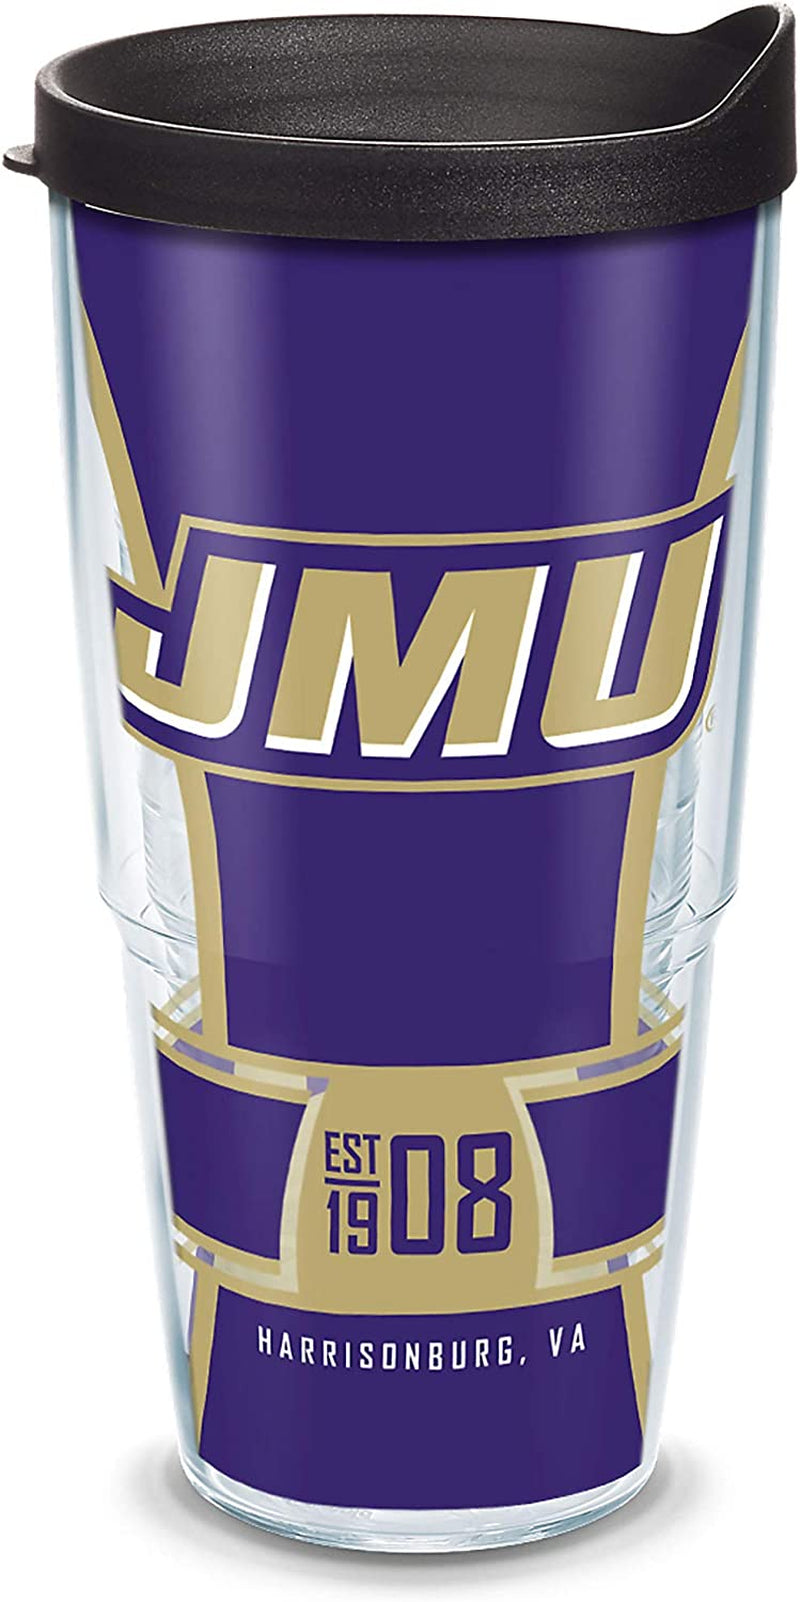 Tervis Made in USA Double Walled James Madison University JMU Dukes Insulated Tumbler Cup Keeps Drinks Cold & Hot, 24Oz - Black Lid, Primary Logo Home & Garden > Kitchen & Dining > Tableware > Drinkware Tervis Spirit 24oz - Black Lid 